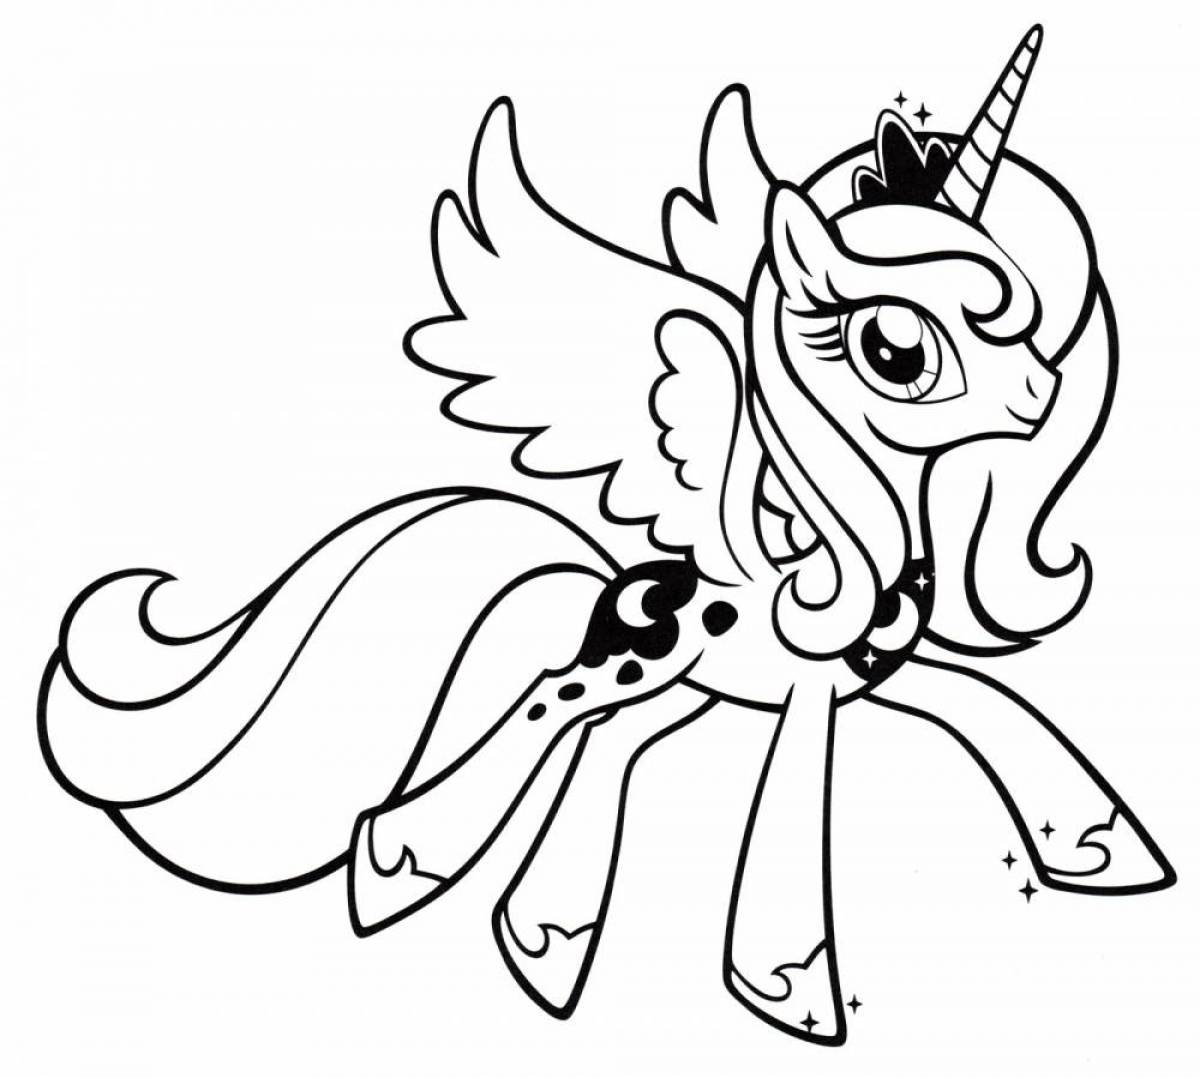 Exquisite moon pony coloring book